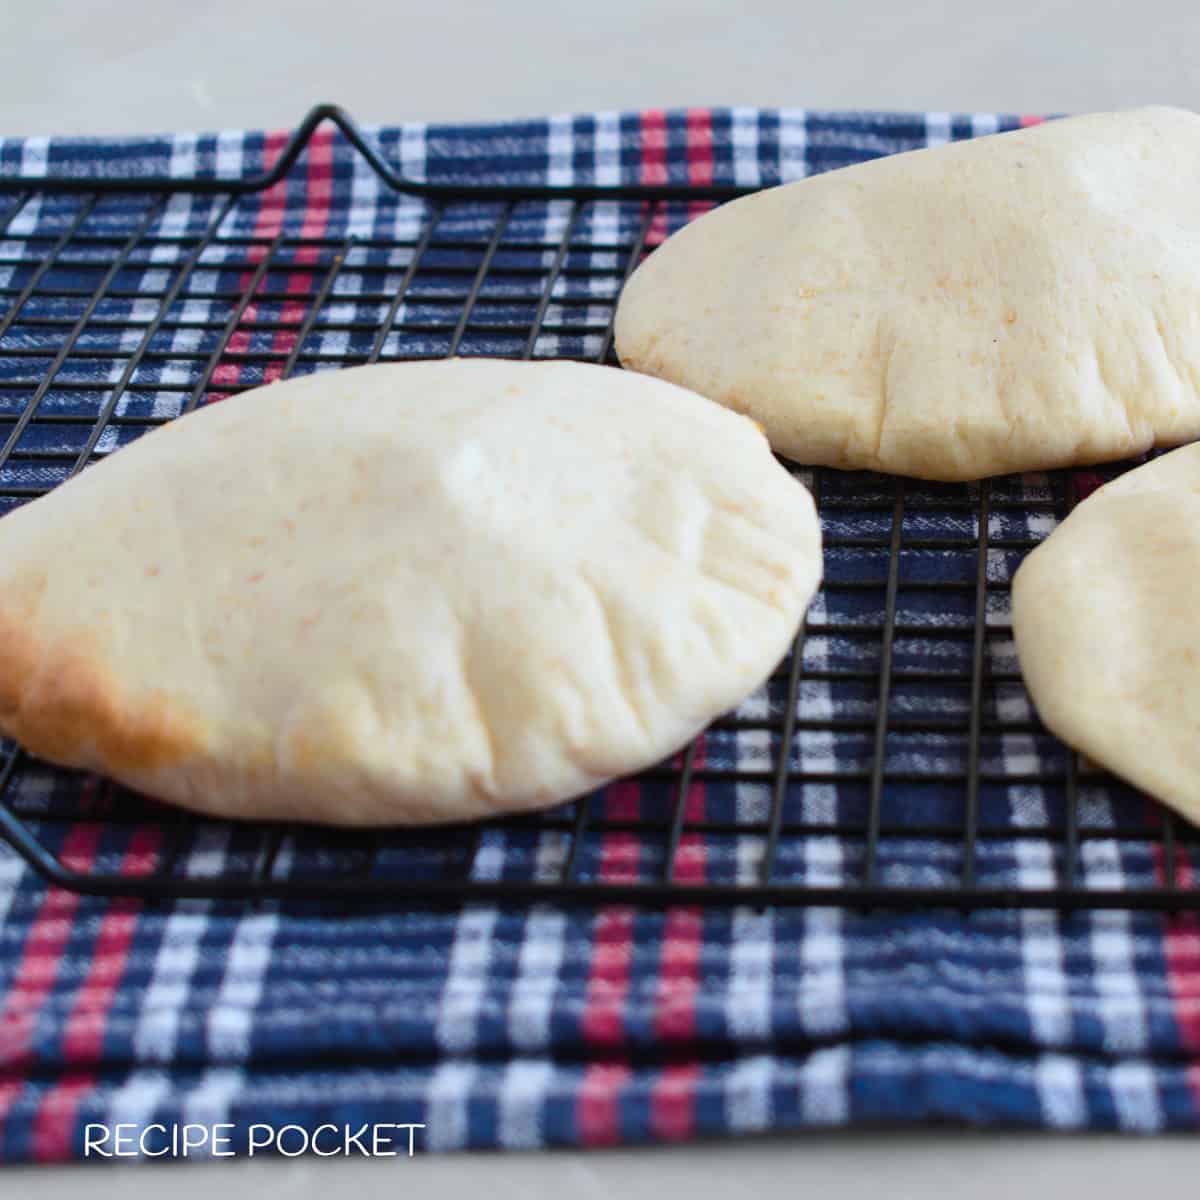 Oven baked pita bread puffed and just out of the oven.